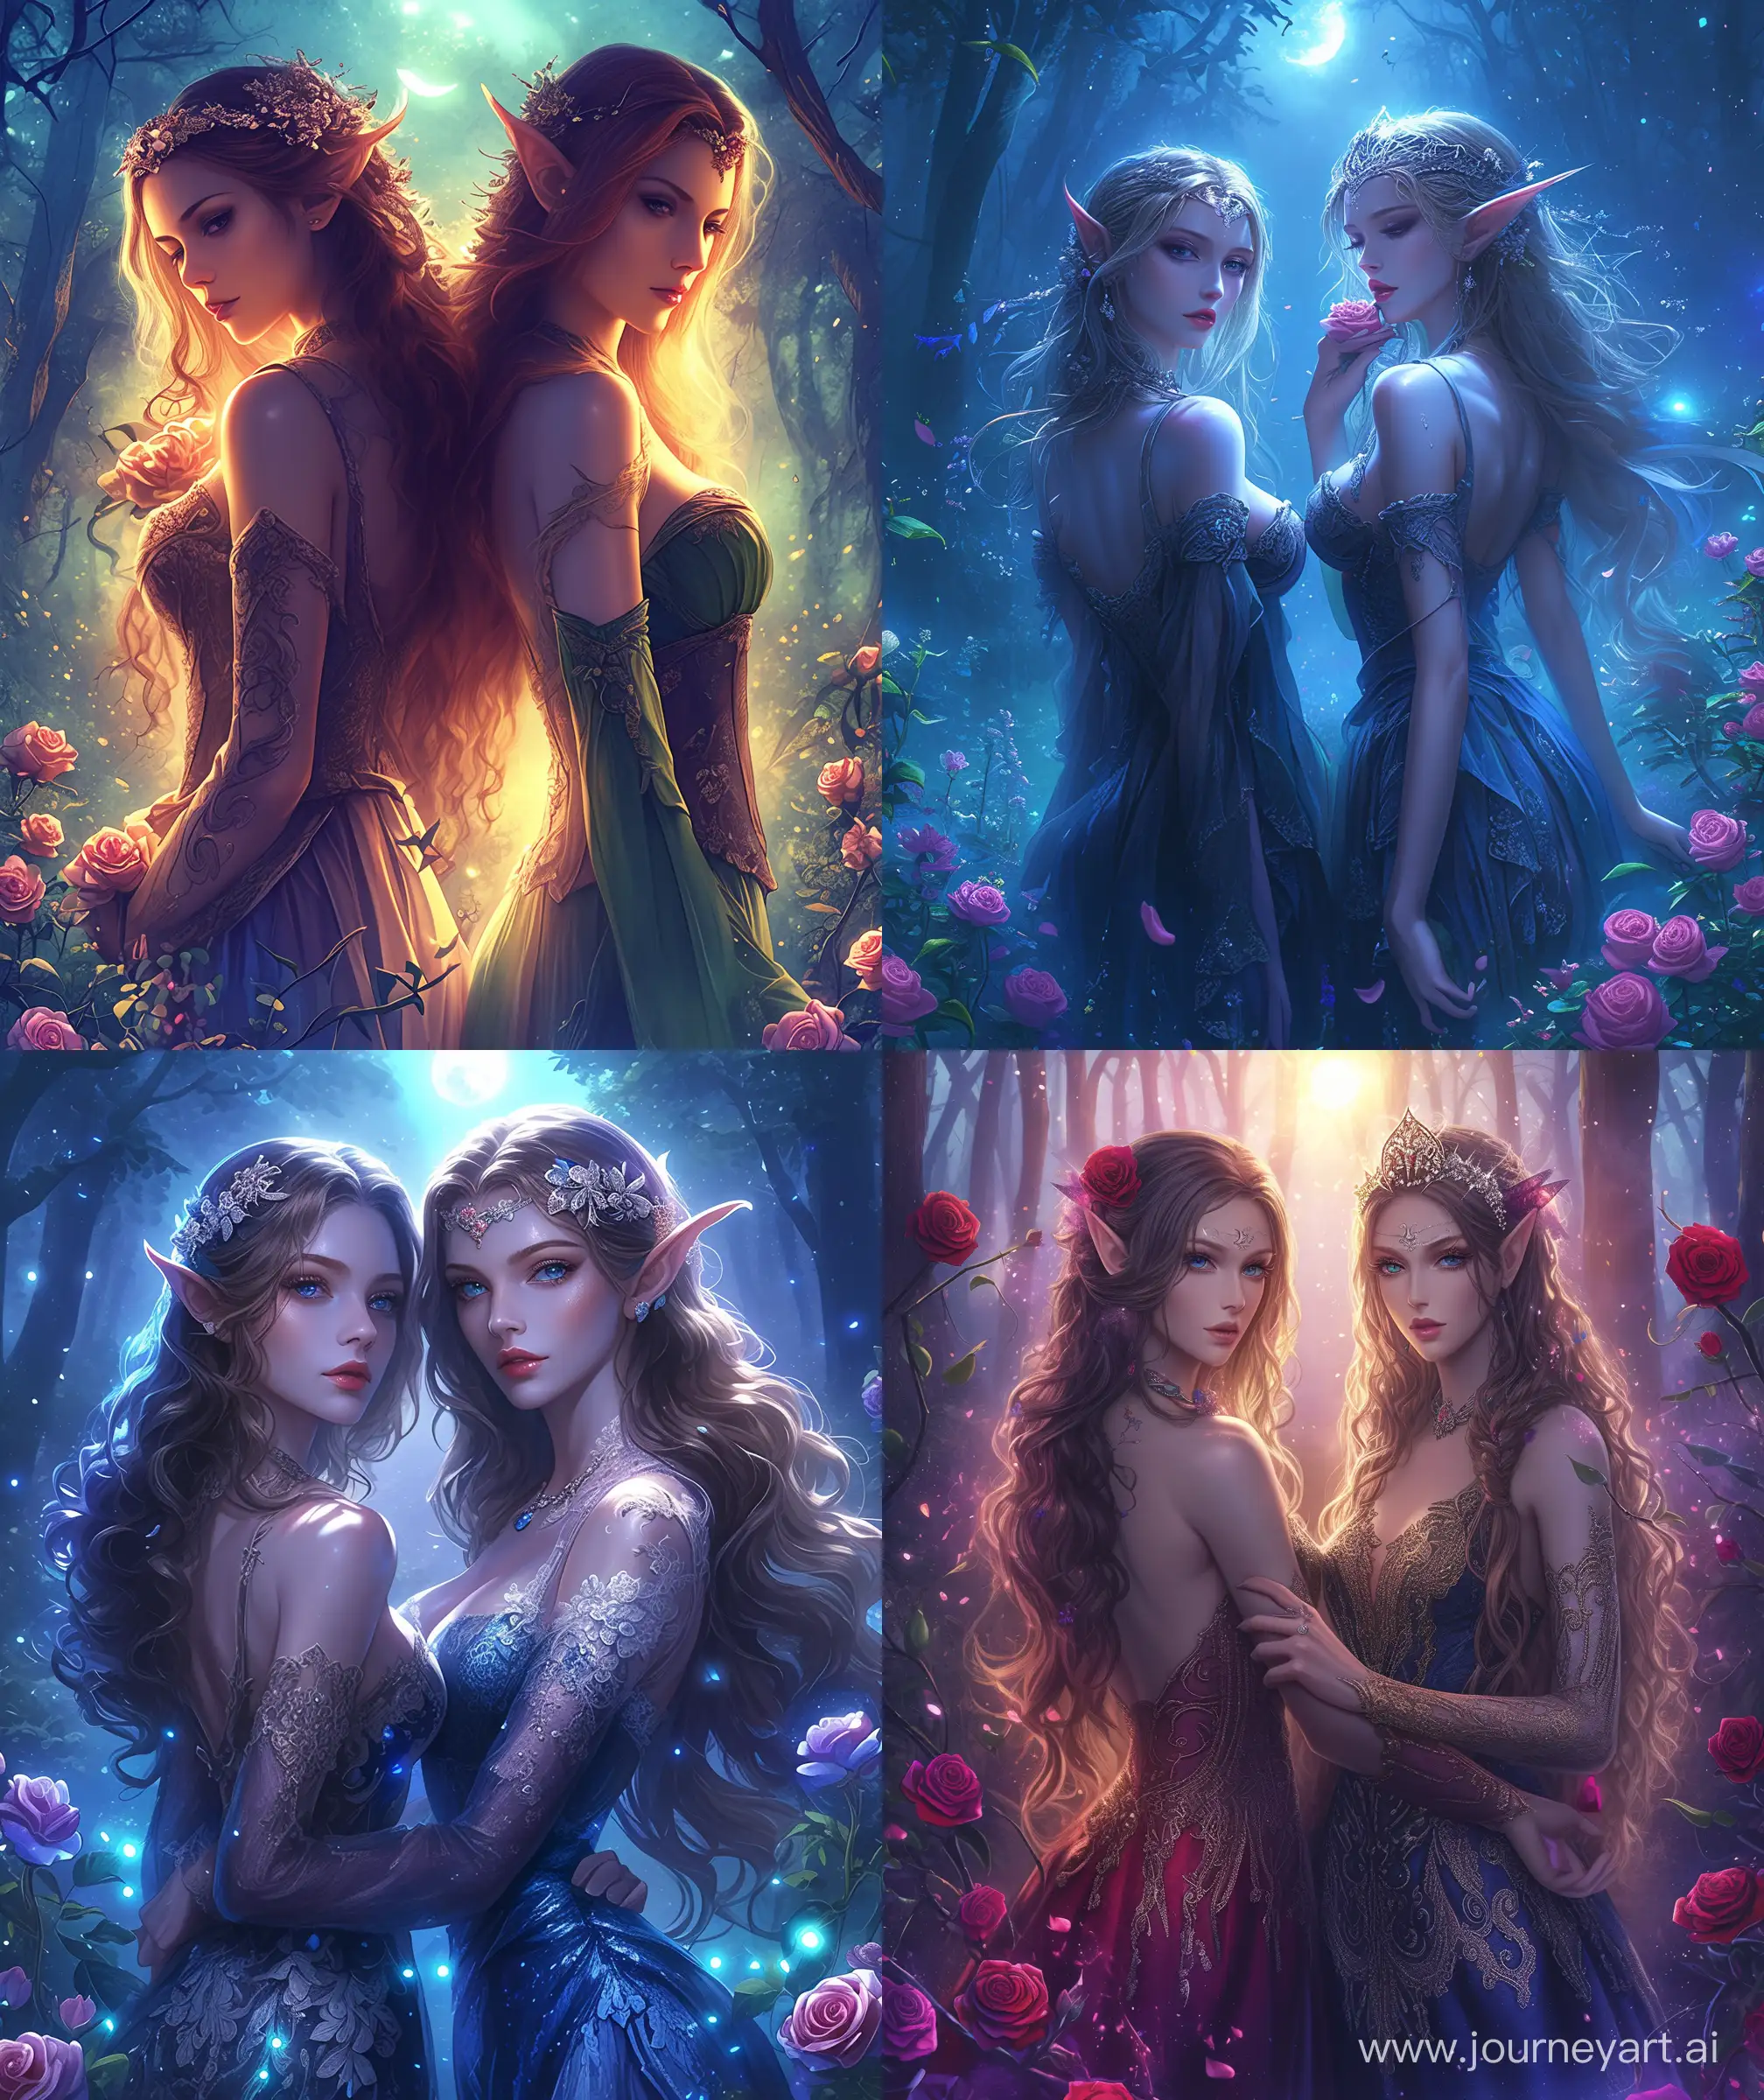 Beautiful two woman, elves sisters, mature and beautiful, wearing beautiful dress, moonlight, forest ambient, magical atmosphere, roses around, two elves, beautiful hair style, ultra HD, high quality, sharp details, flowers Tiara wearing, luminating light, --ar 27:32 --niji 6